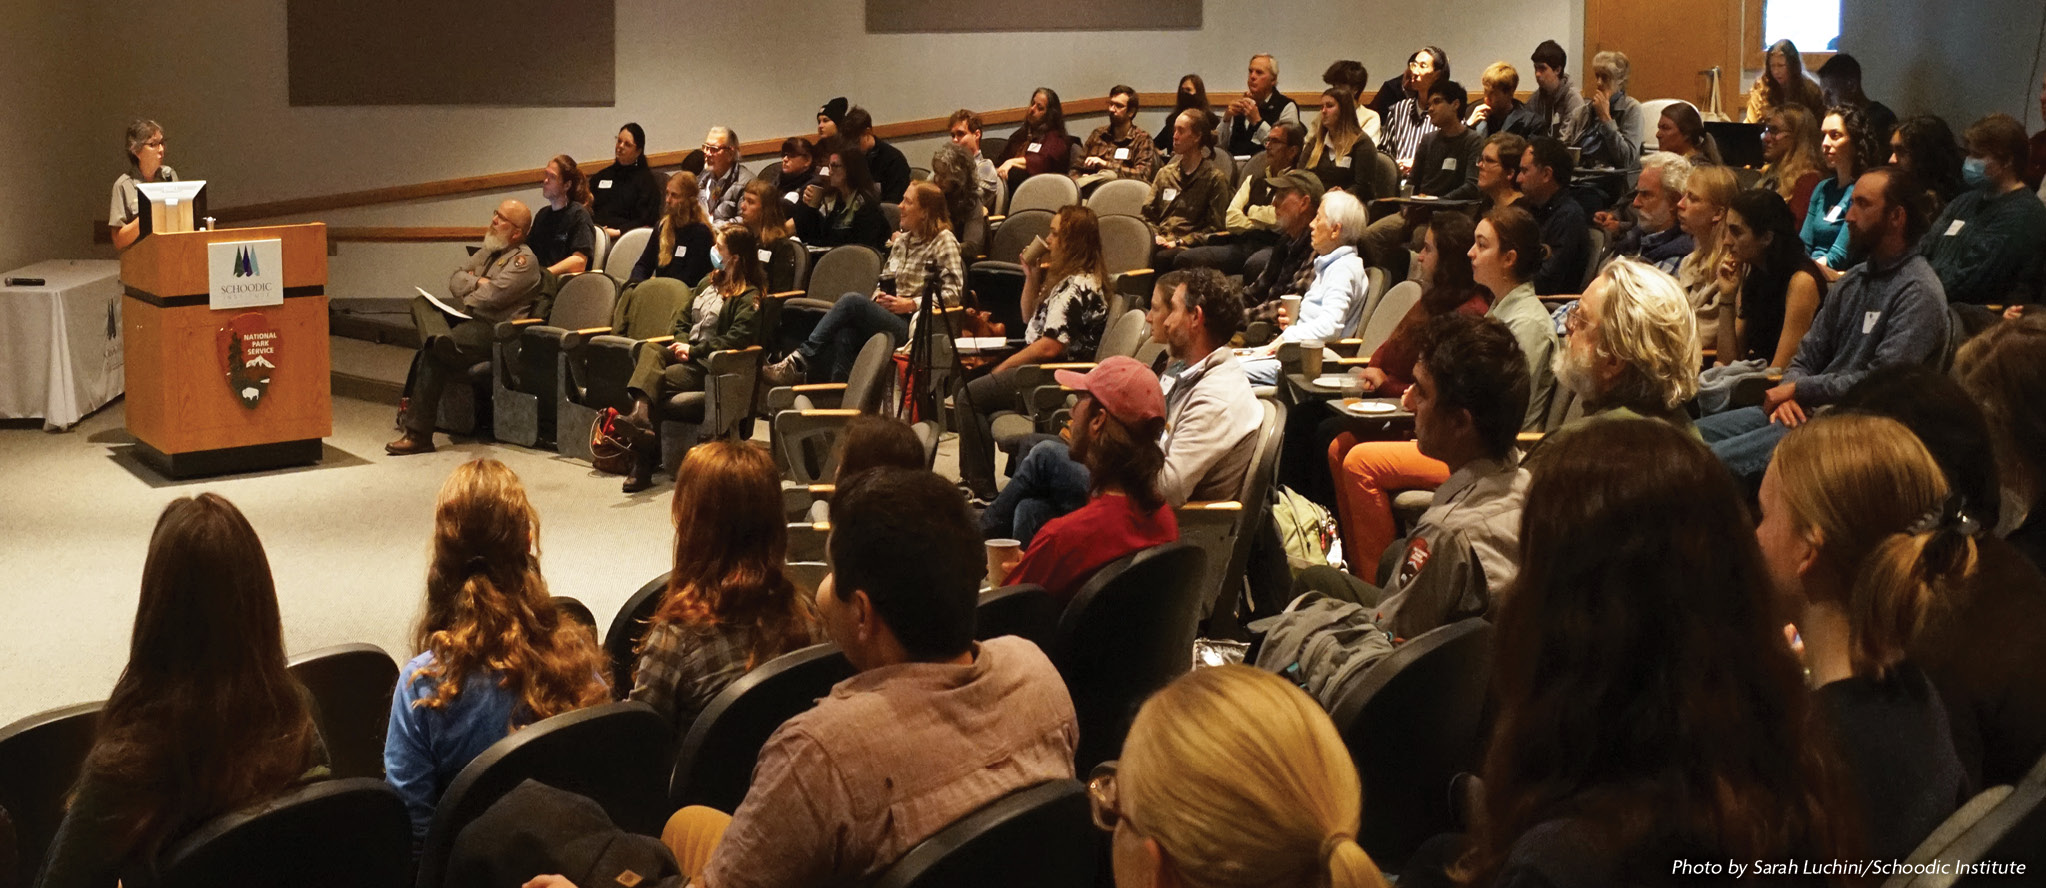 A crowded auditorium at Schoodic Institute listens attentively to a speaker during the Acadia Science Symposium.